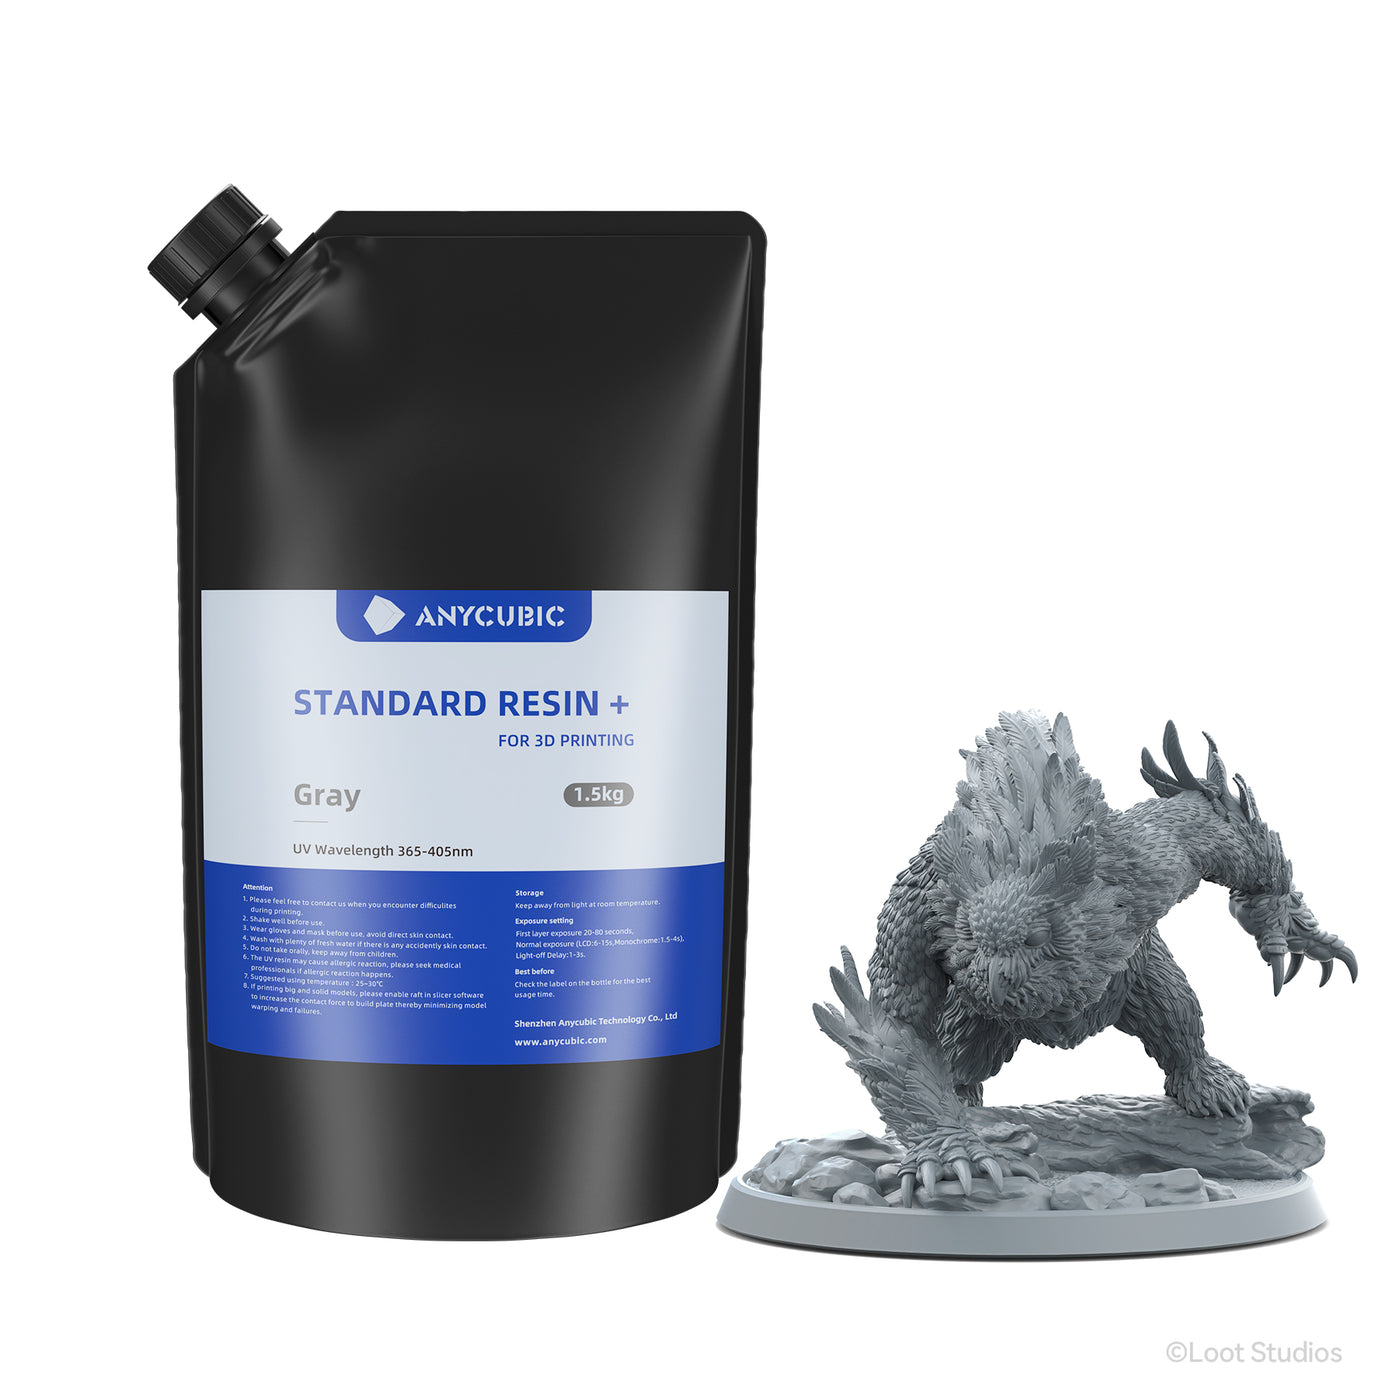 Standard Resin+ 1.5KG - Get 3 for the Price of 2